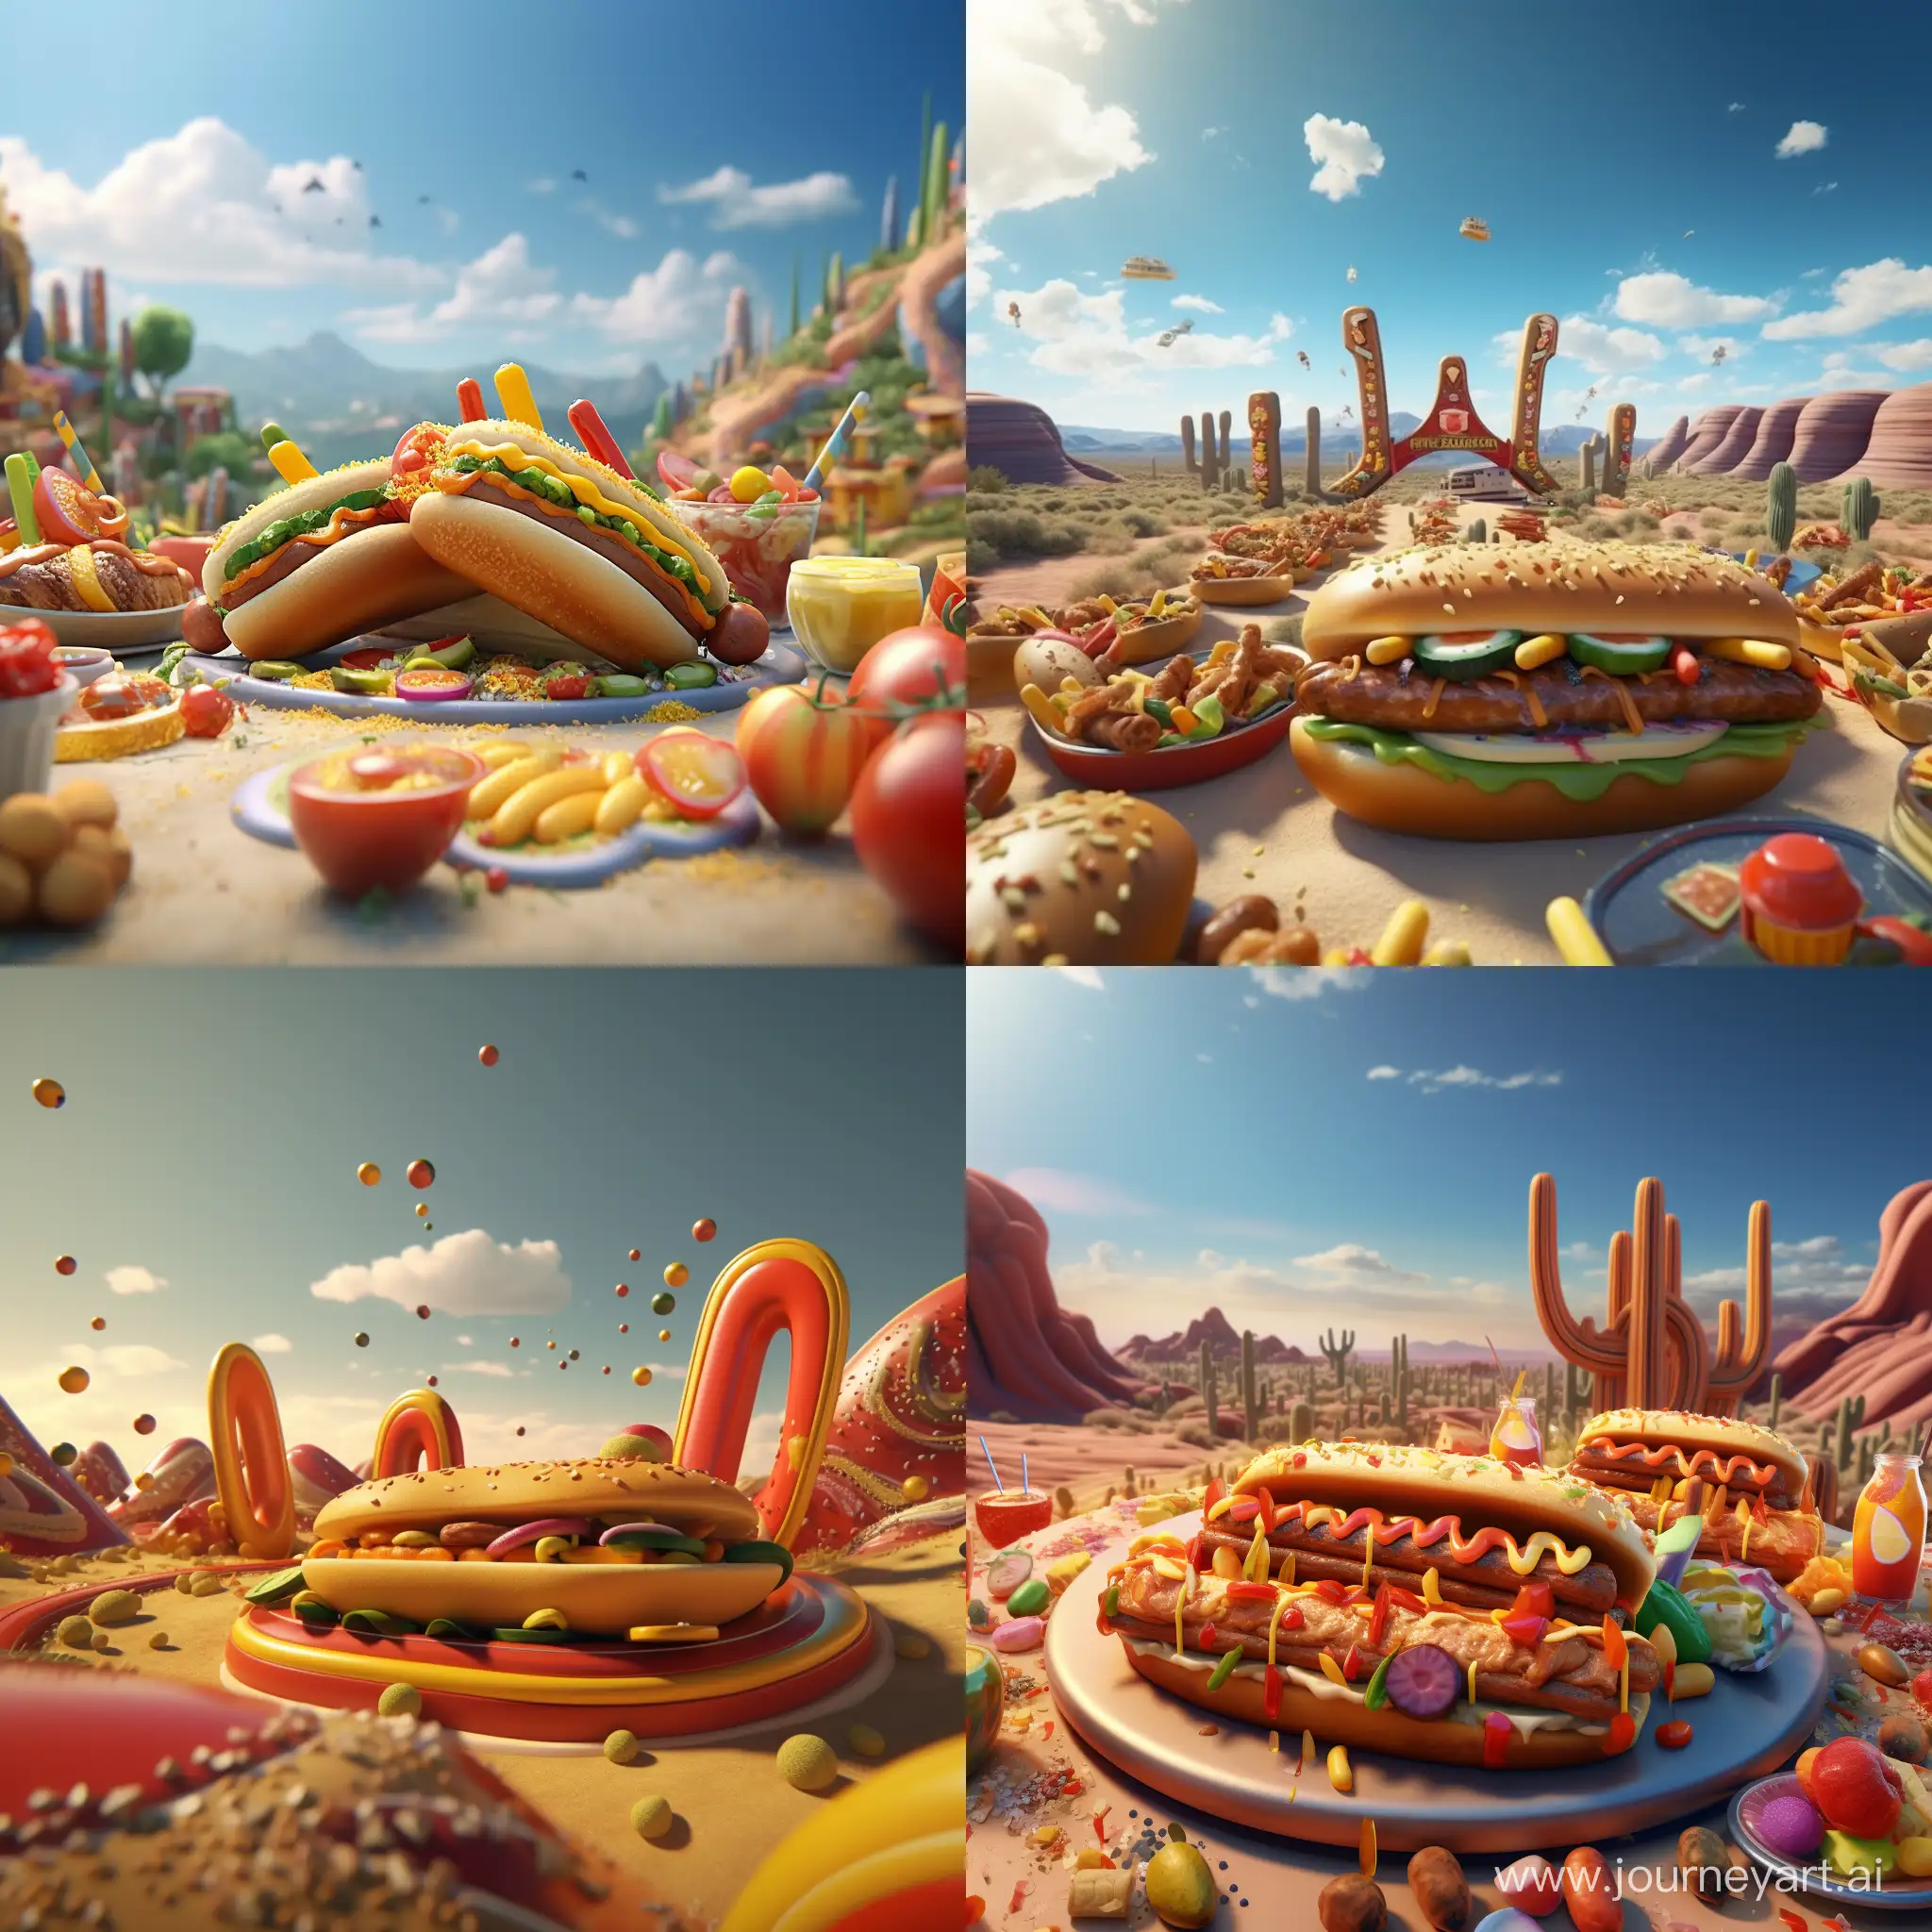 Vibrant-3D-Animation-Hot-Dog-Fiesta-in-the-Valley